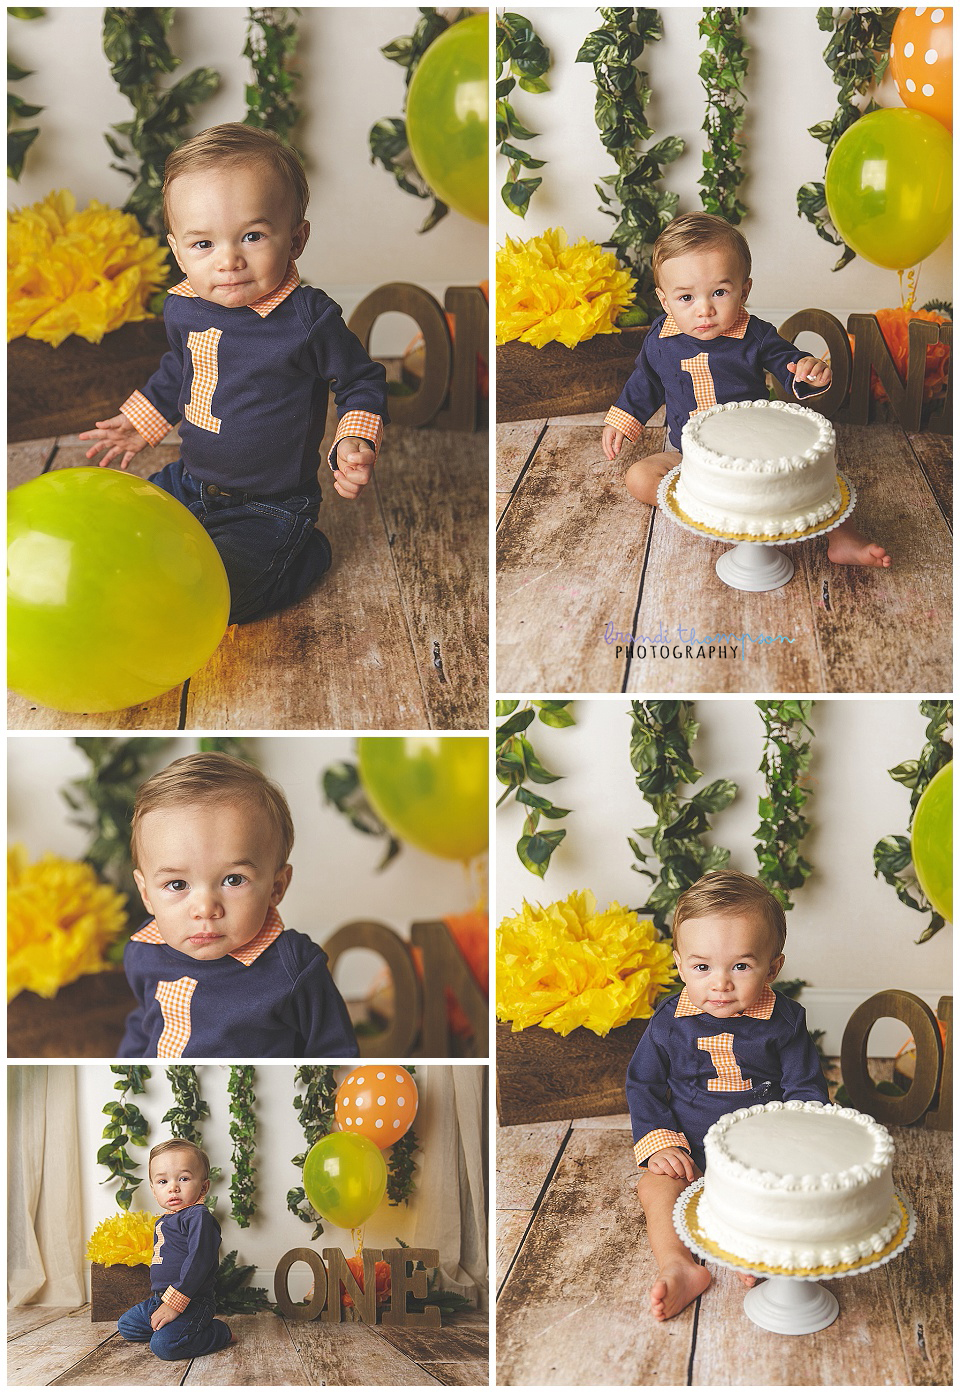 One year old boy cake smash in plano, tx studio - he wears a navy onesie with a 1 on it, and blue jeans. He eats a white cake.